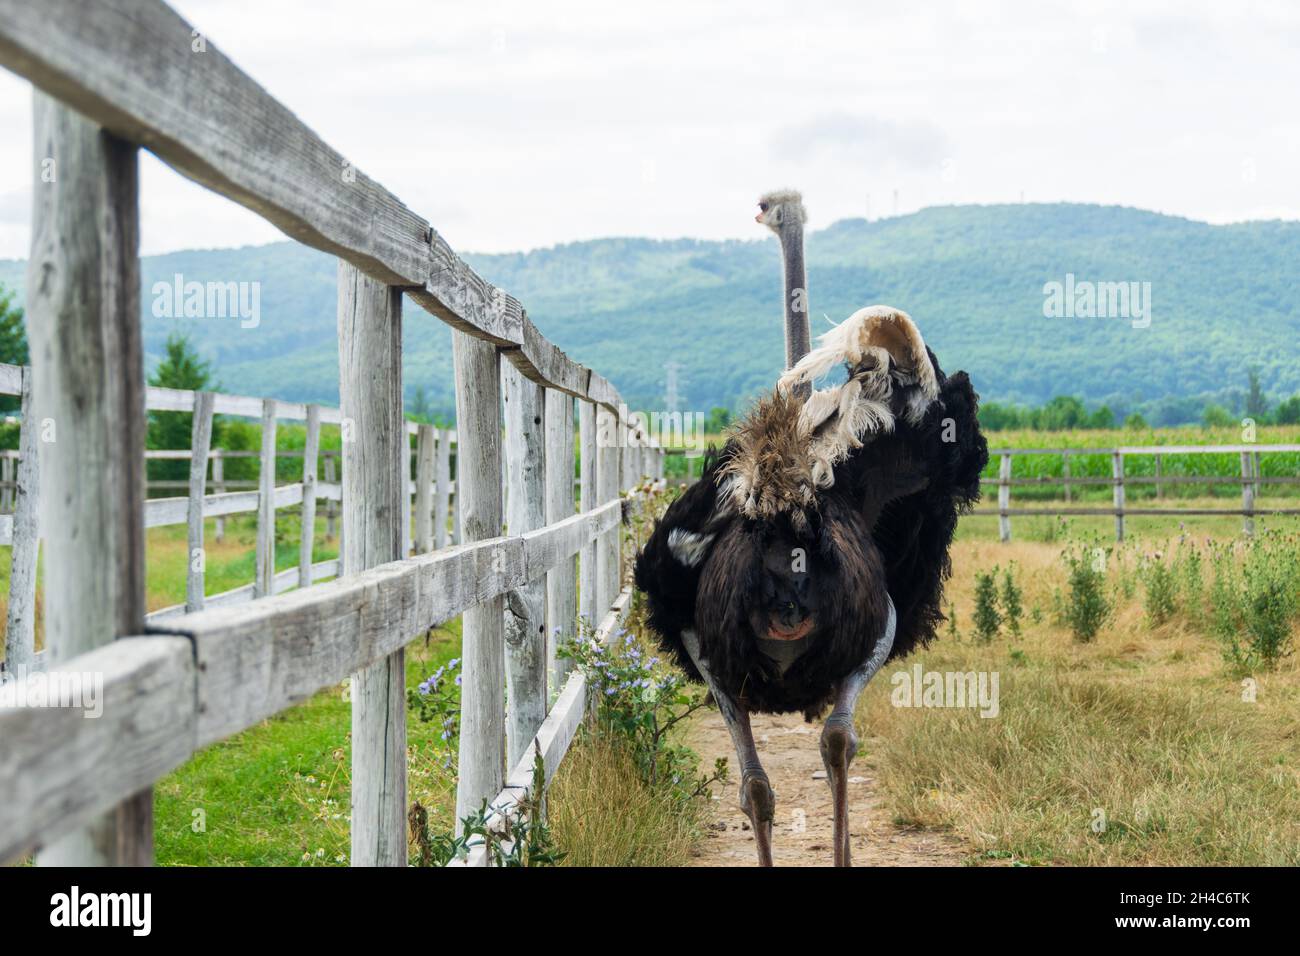 Common ostrich, Struthio Camelus, or simply ostrich raised on the farm Stock Photo